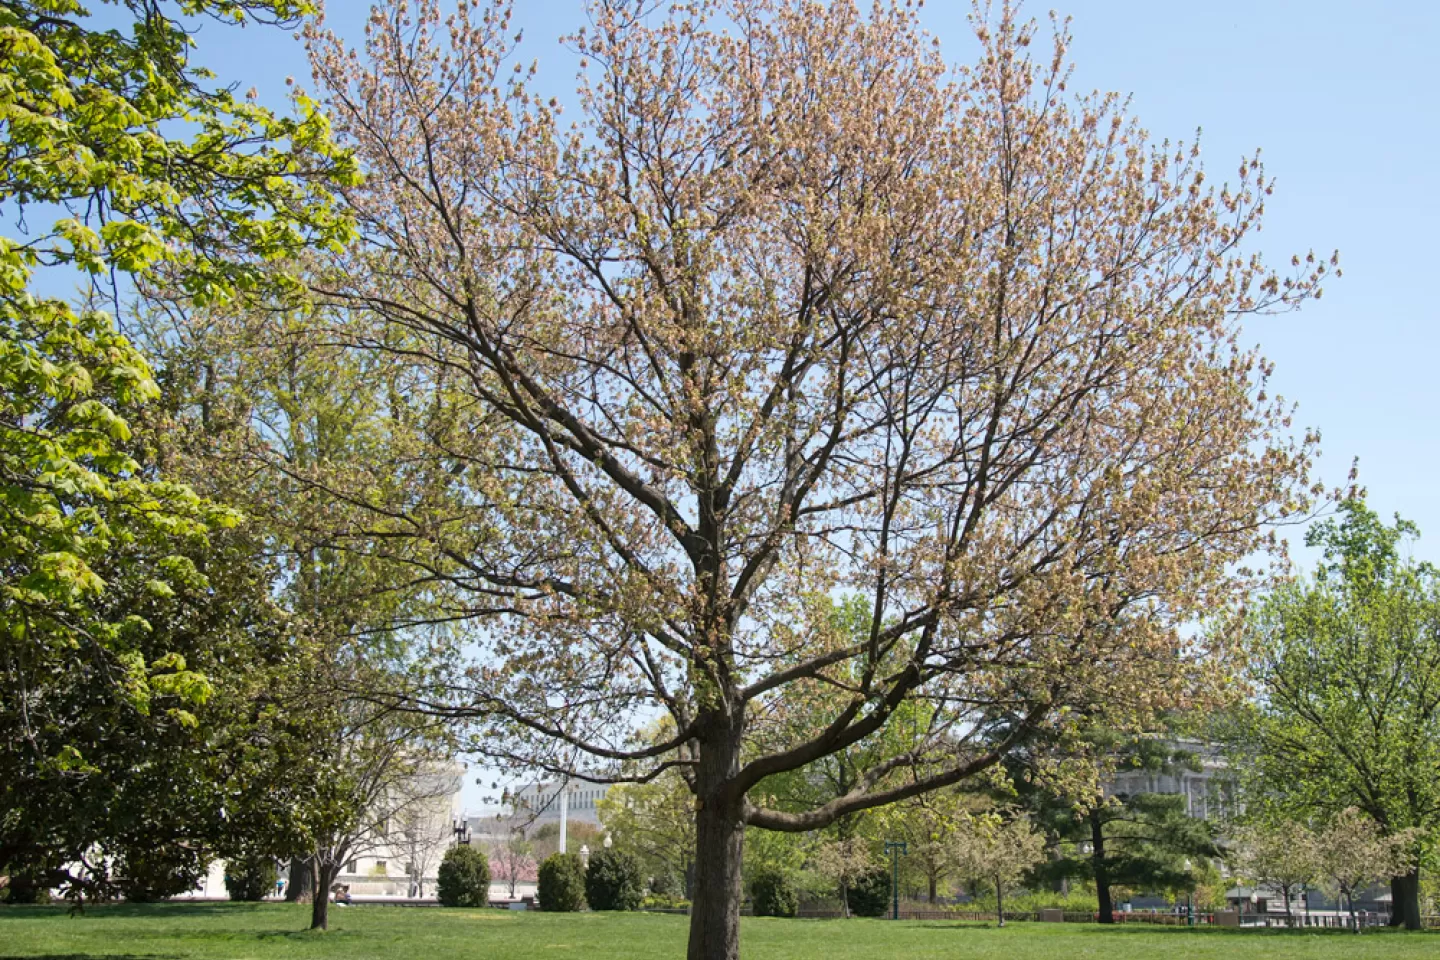 The Senator Saltonstall tree on the U.S. Capitol Grounds during spring.